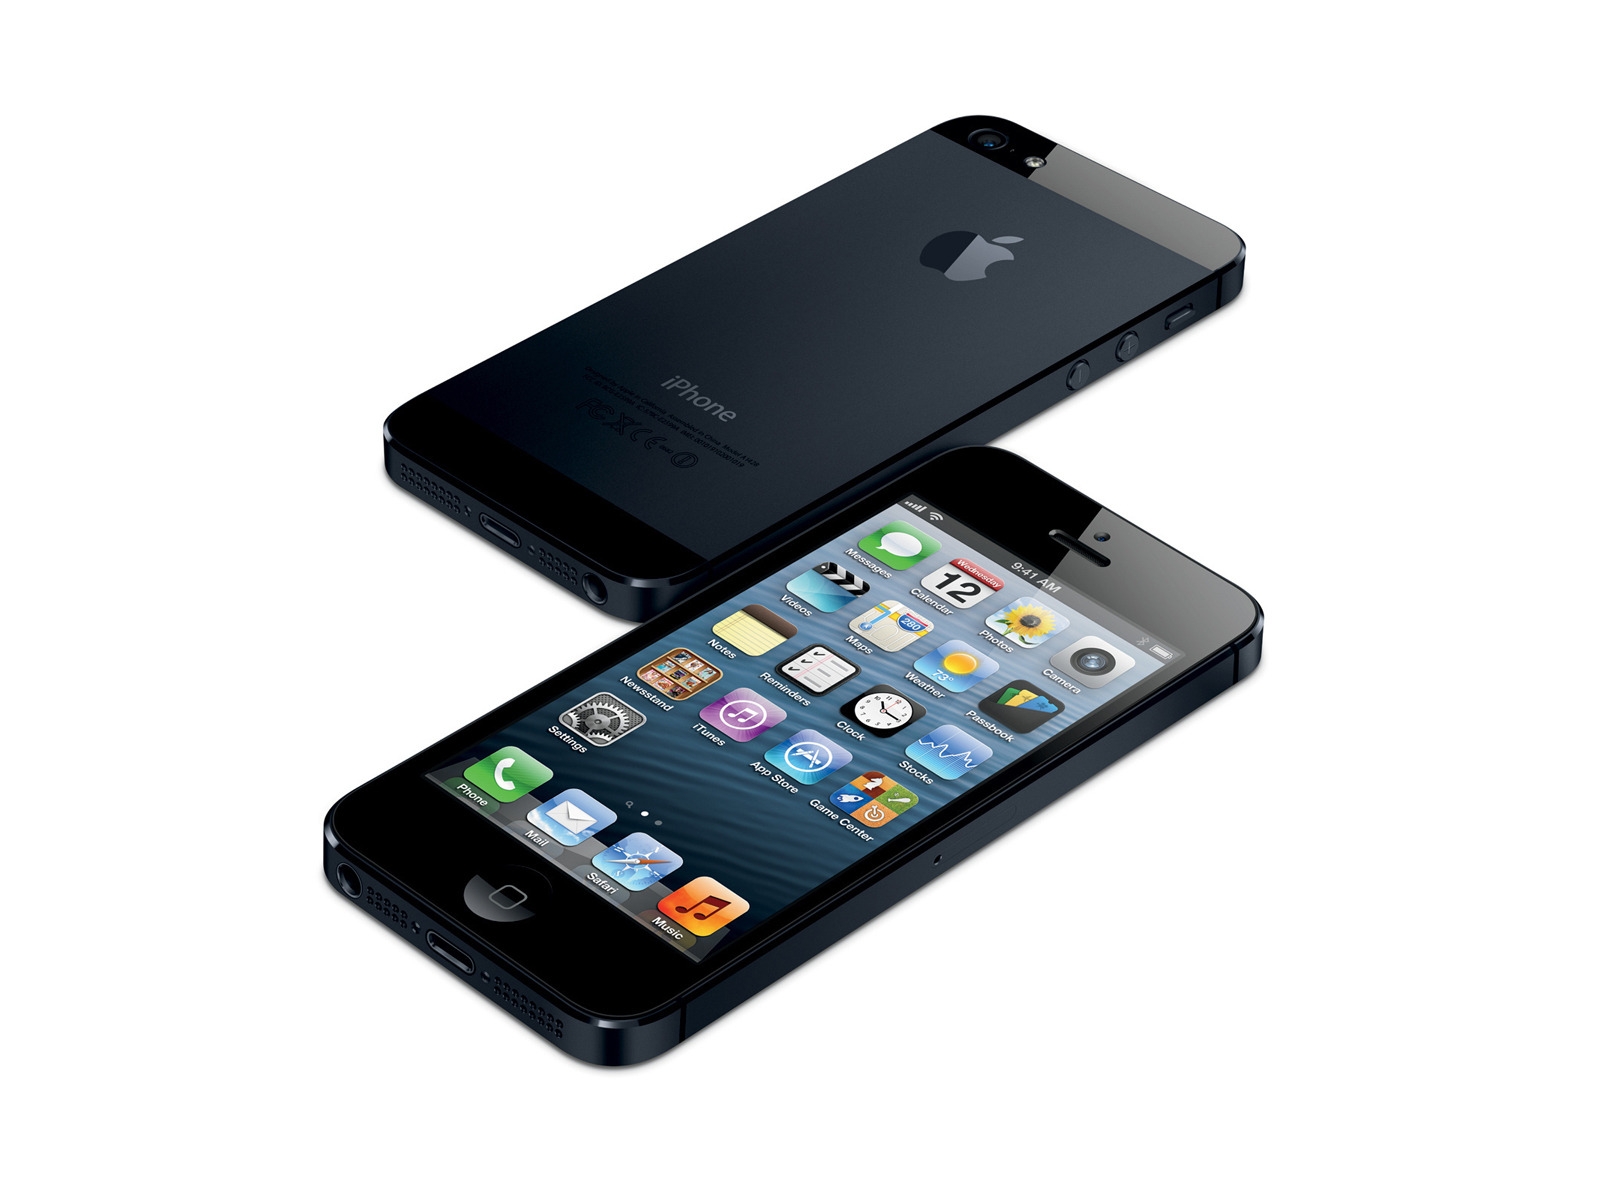 Black iPhone 5 for 1600 x 1200 resolution